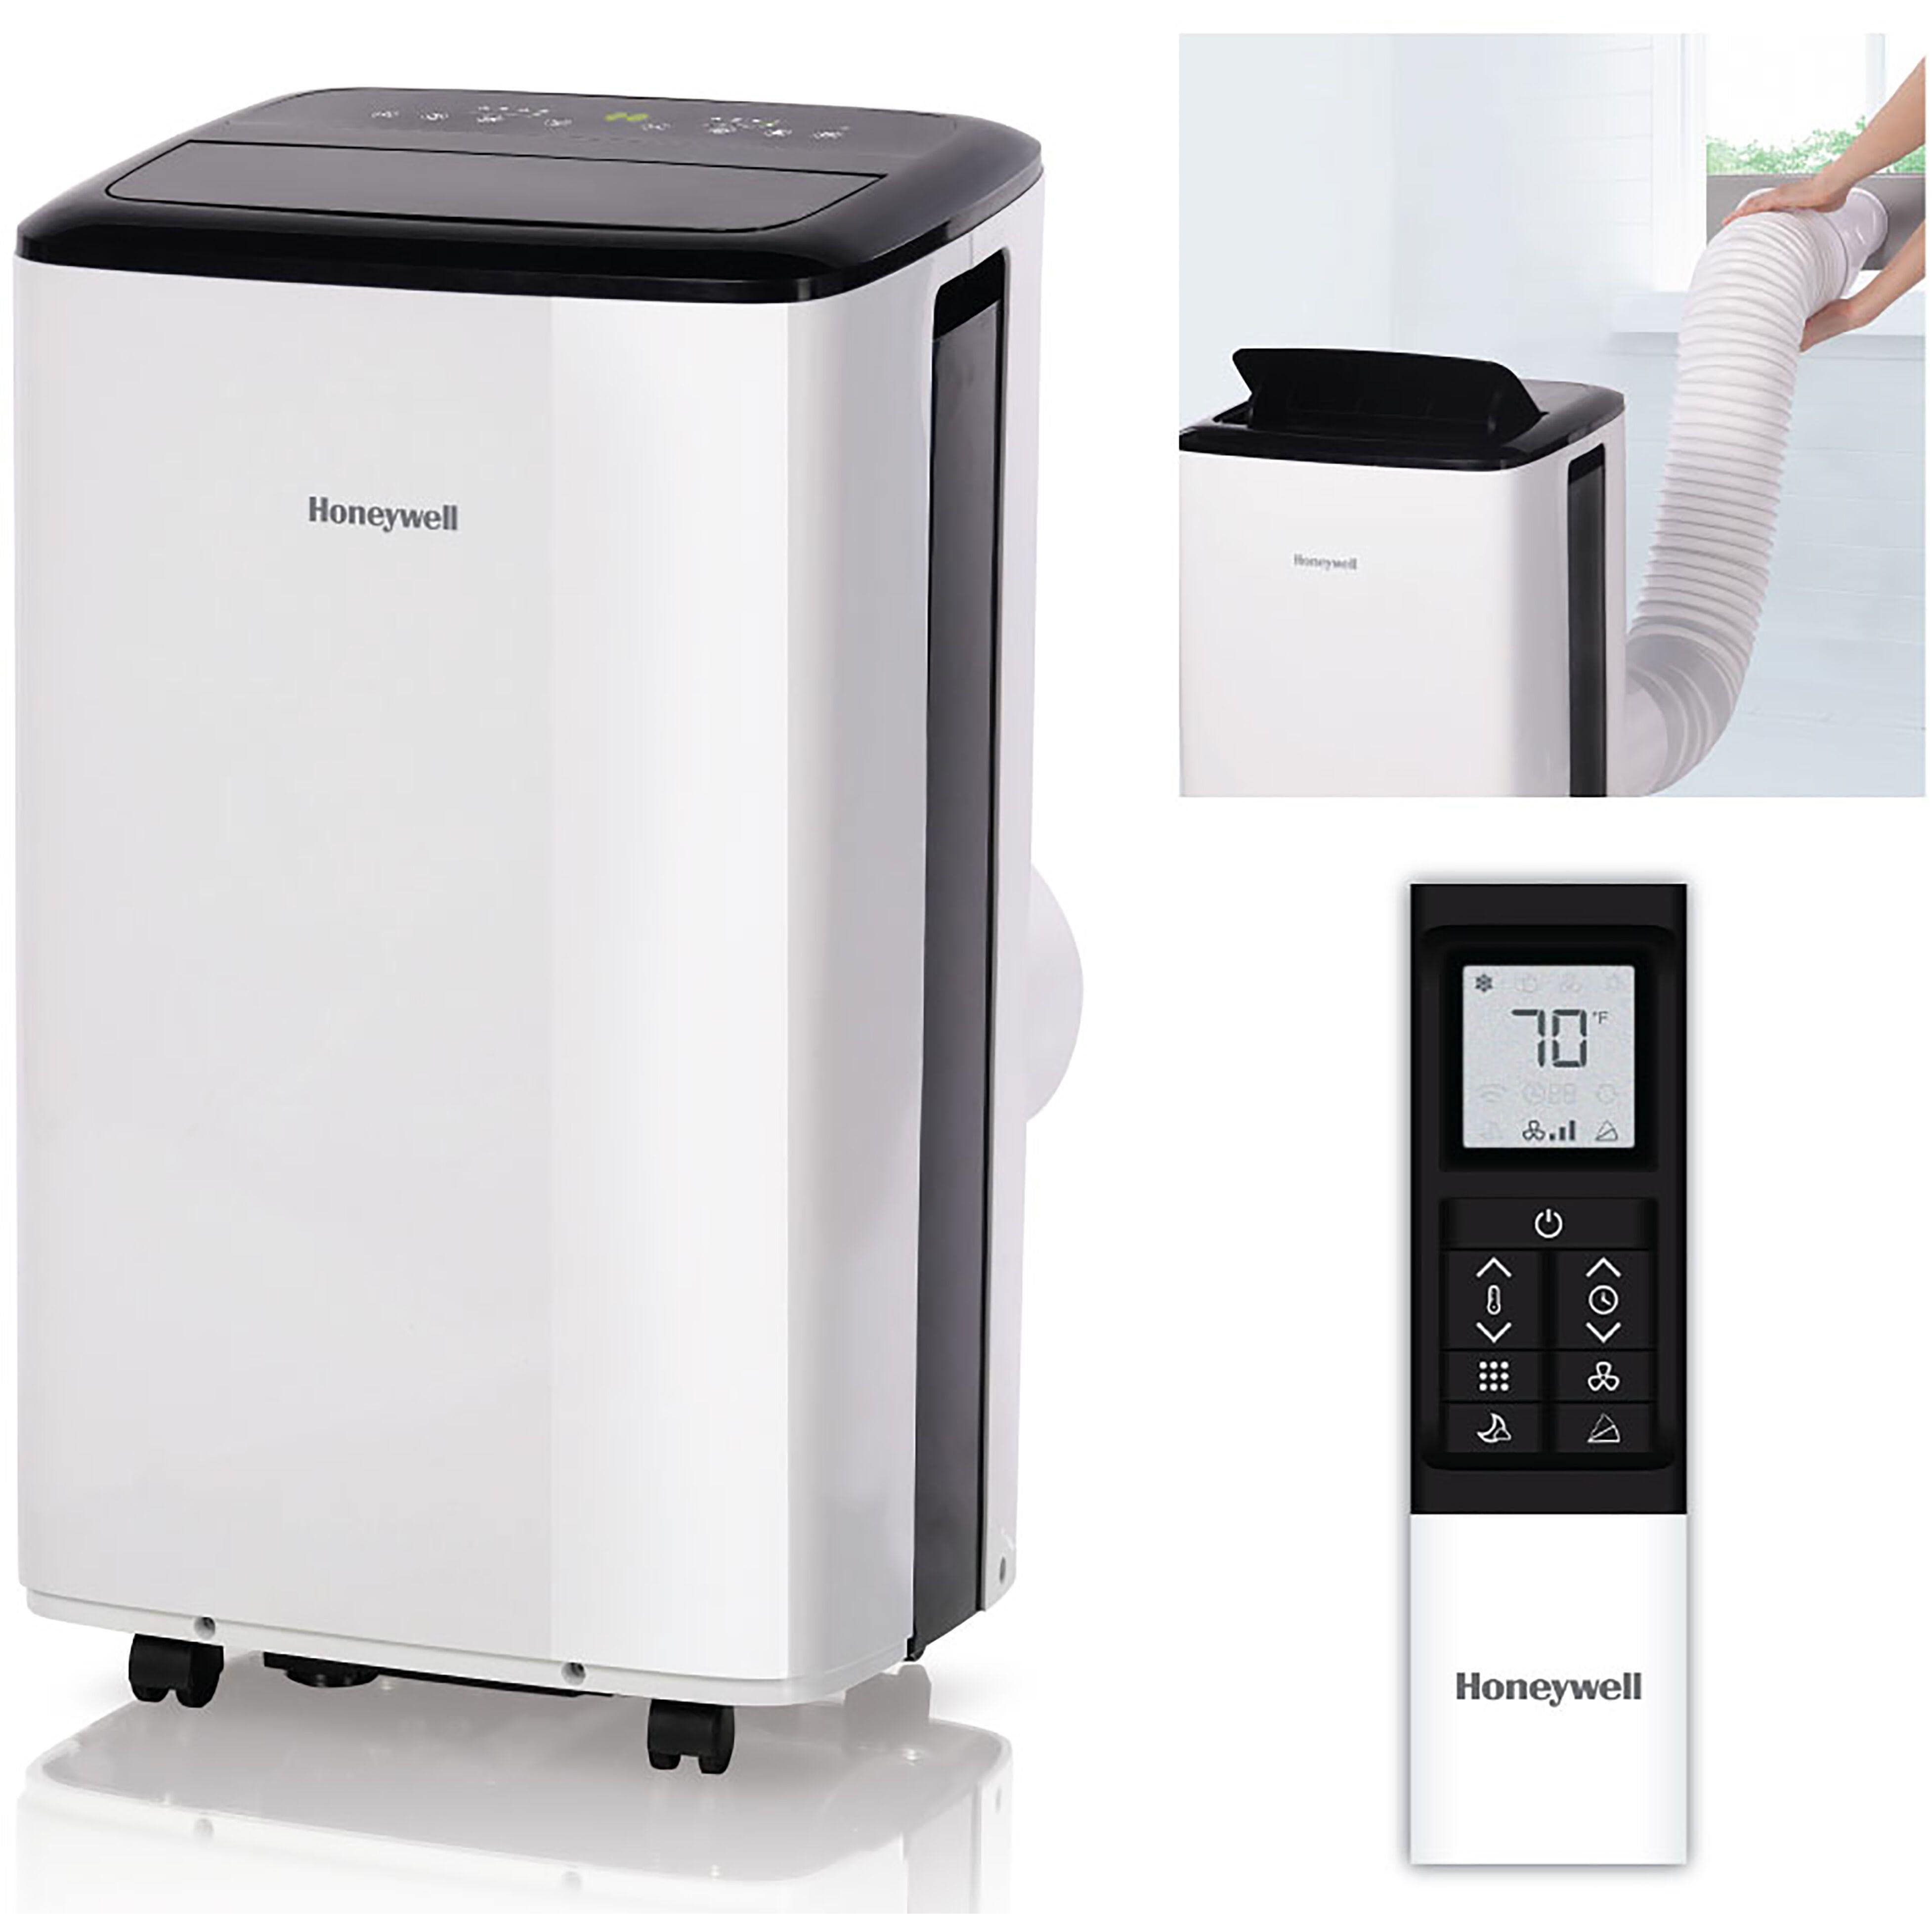 Honeywell Portable Honeywell Compact Portable Air Conditioner w/ Dehumidifier & Fan Cools Rooms Up To 450 Sq.Ft. w/ Drain Pan & Insulation Tape